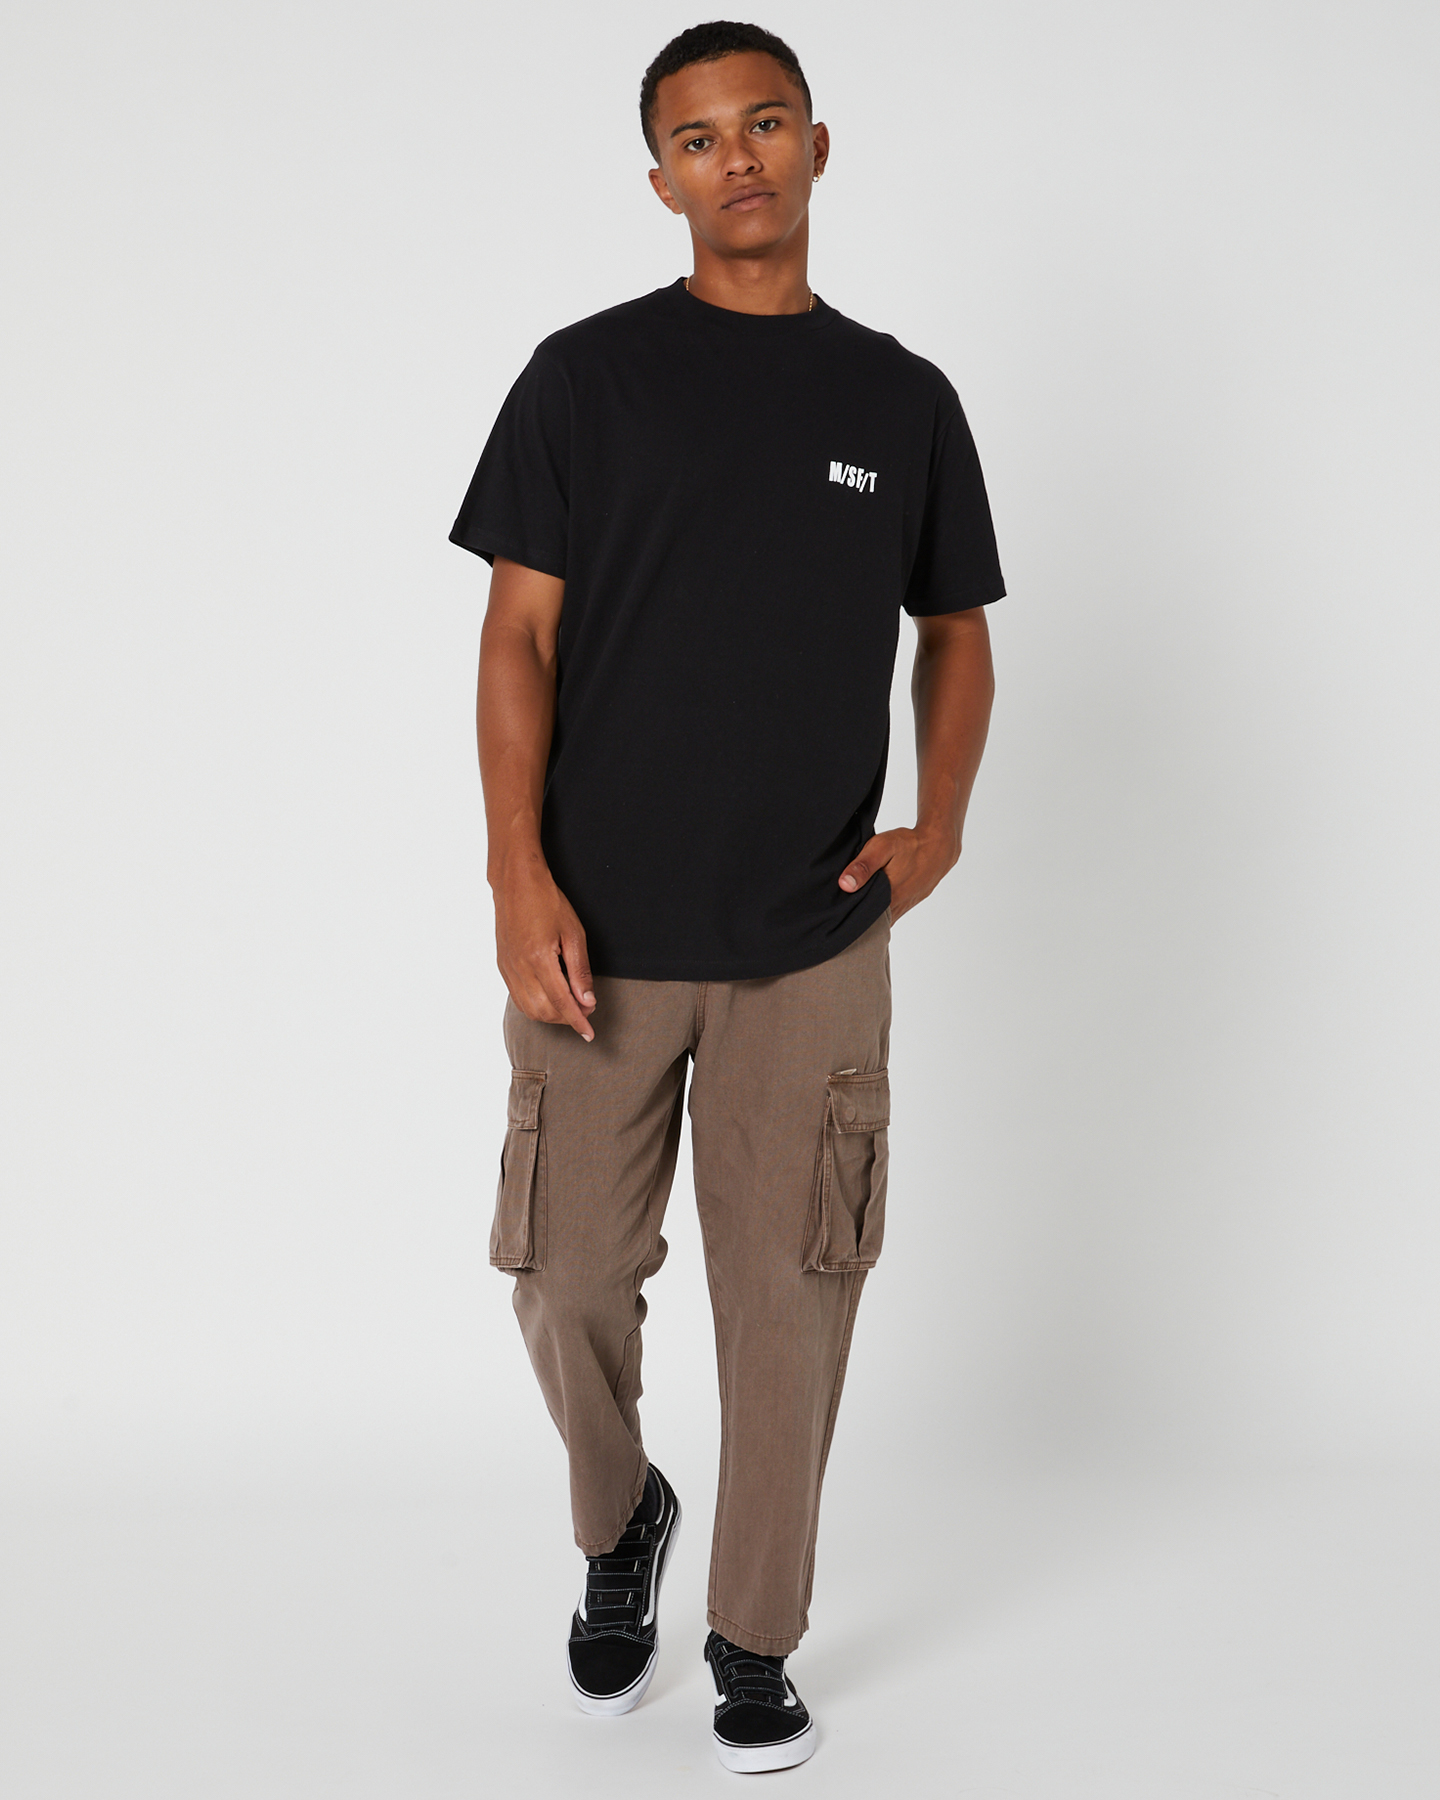 Misfit Green Onions Cargo Pant - Chocolate | SurfStitch